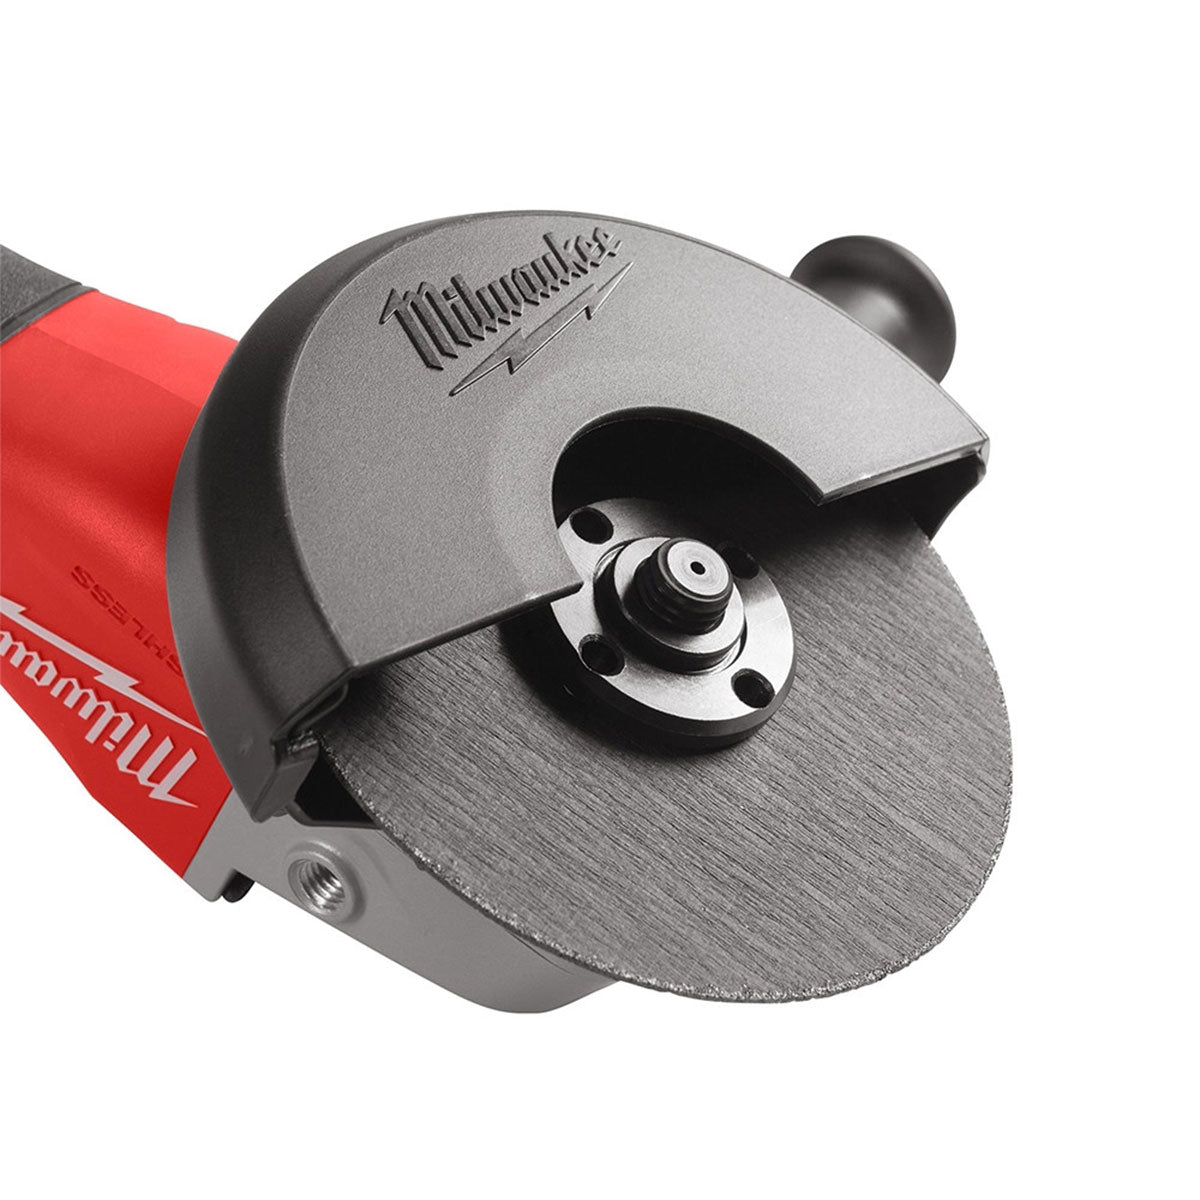 Milwaukee M18BLSAG125XPD-0 18V 125mm Brushless Angle Grinder with Paddle Switch 4933492645